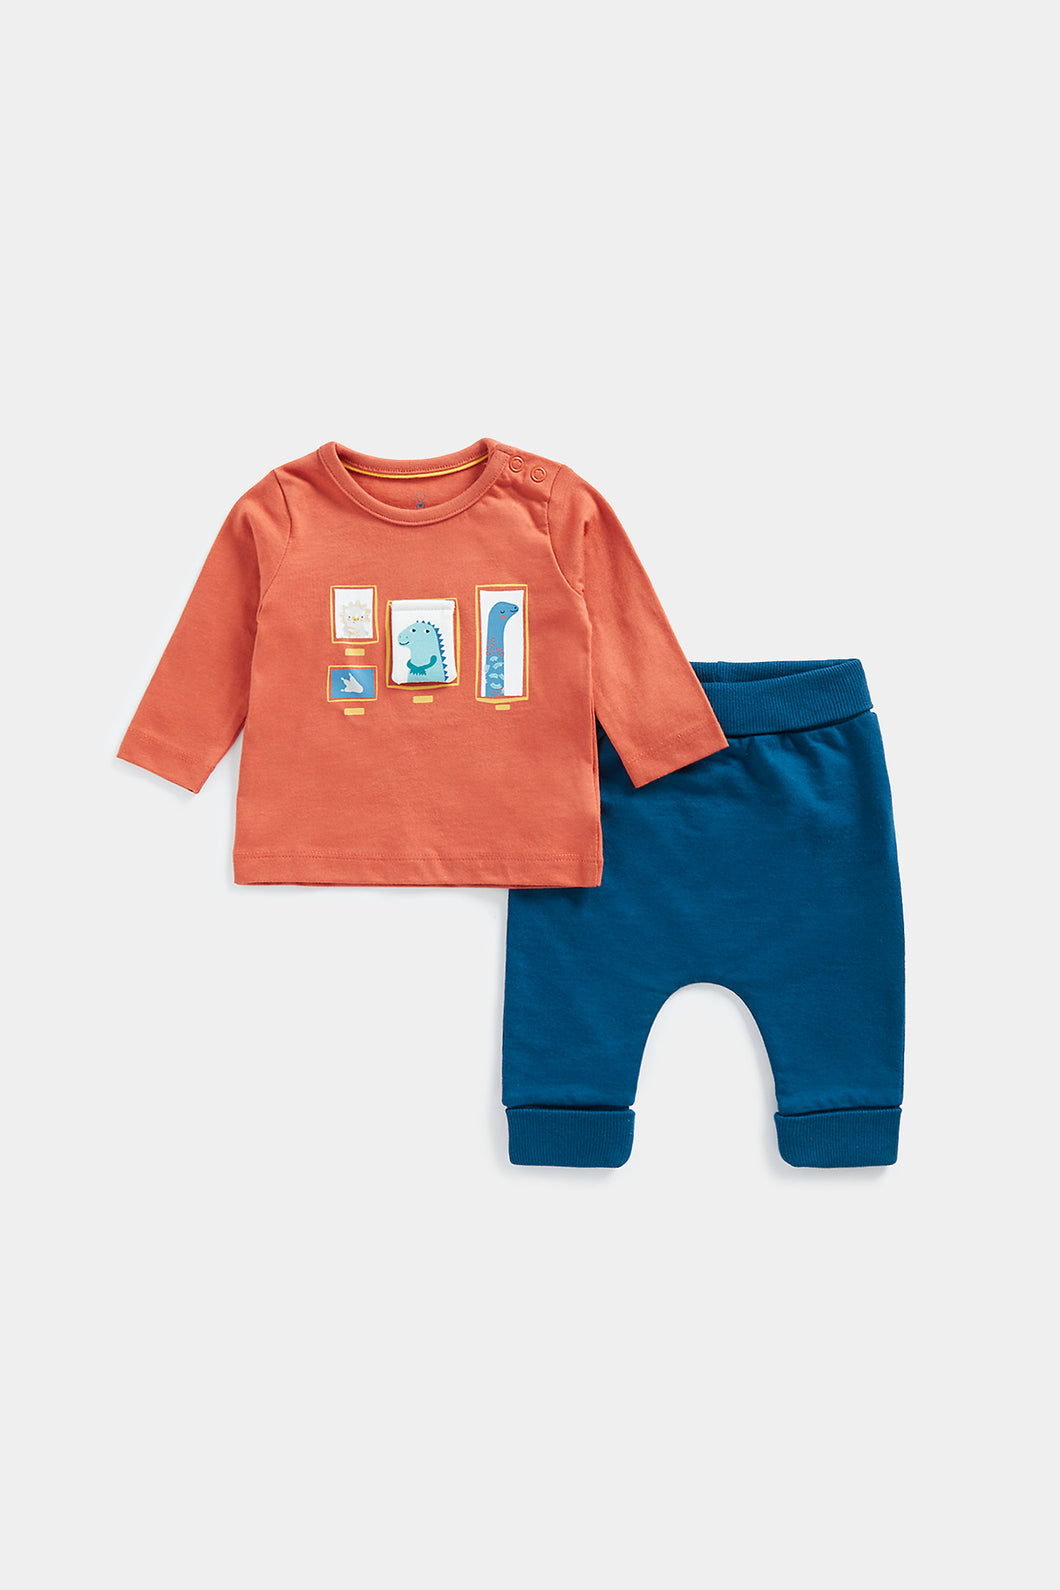 Mothercare Dinosaur Lift-the-Flap Top and Jogger Set